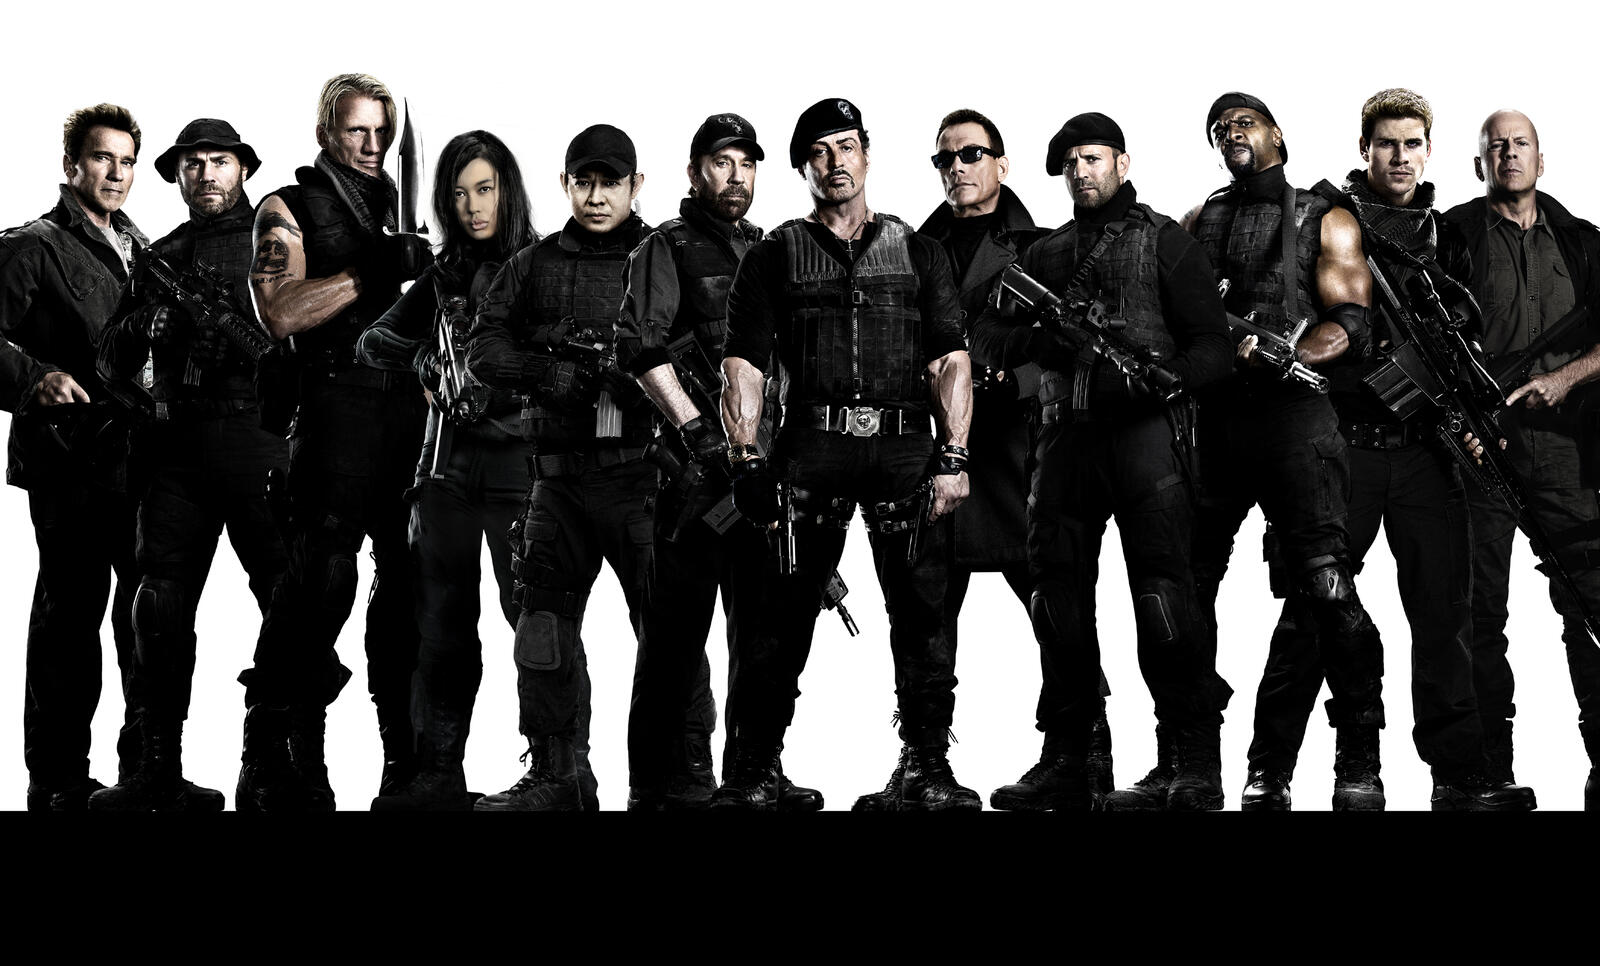 Wallpapers expendables 2 actor people on the desktop